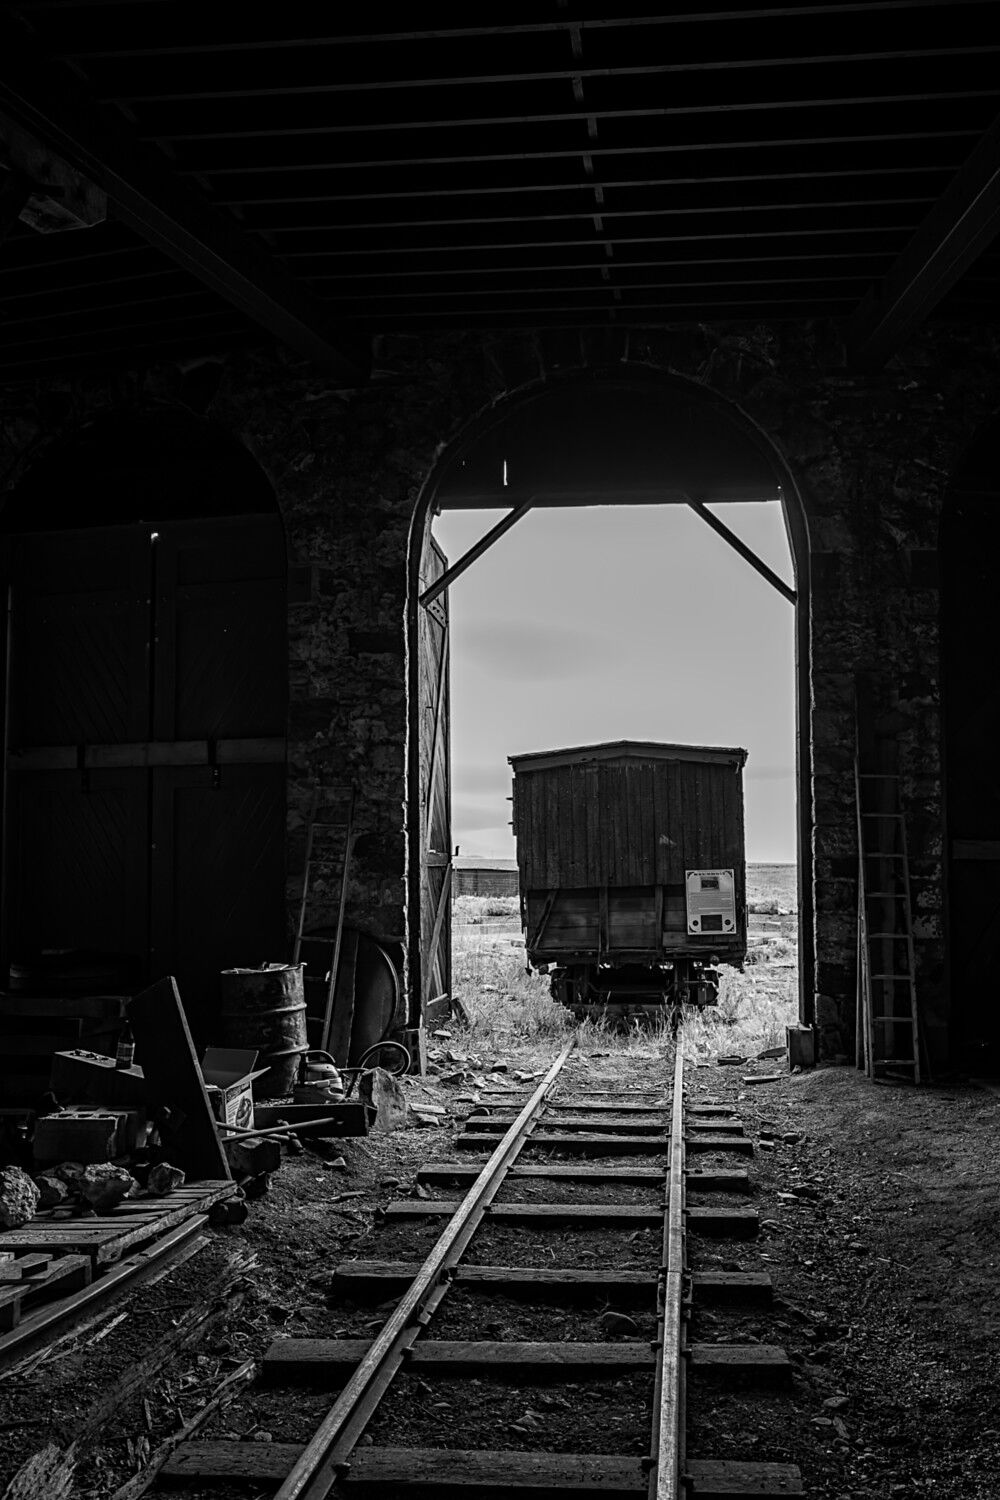 The view from inside the Como roundhouse never changes. The railroad employees probably saw this view 120 years ago working inside...